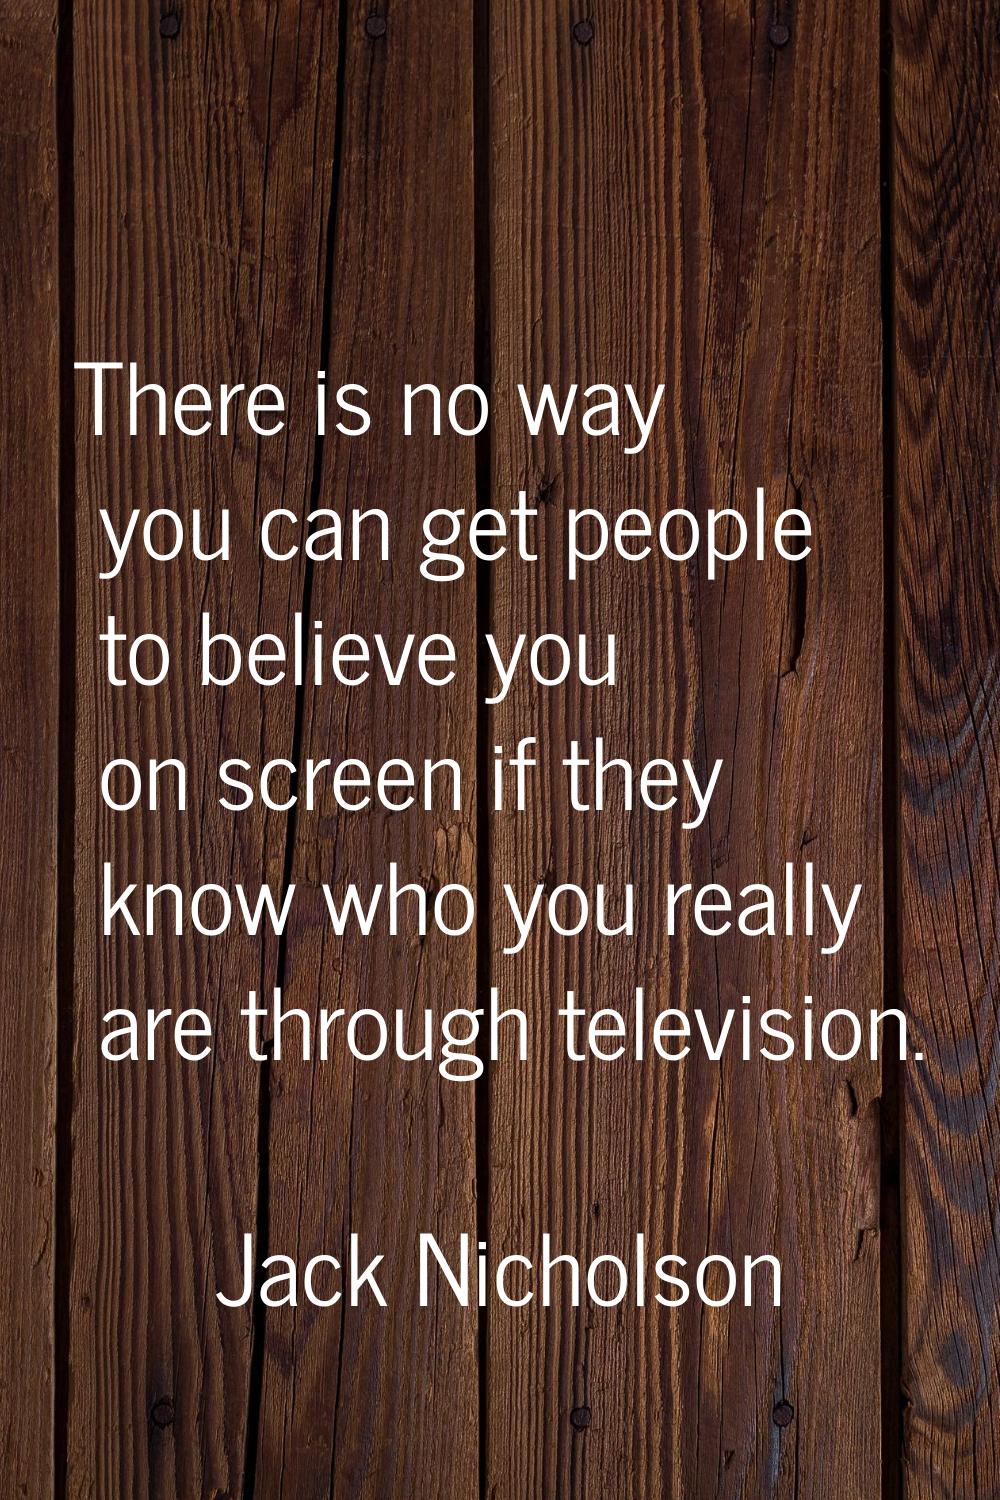 There is no way you can get people to believe you on screen if they know who you really are through